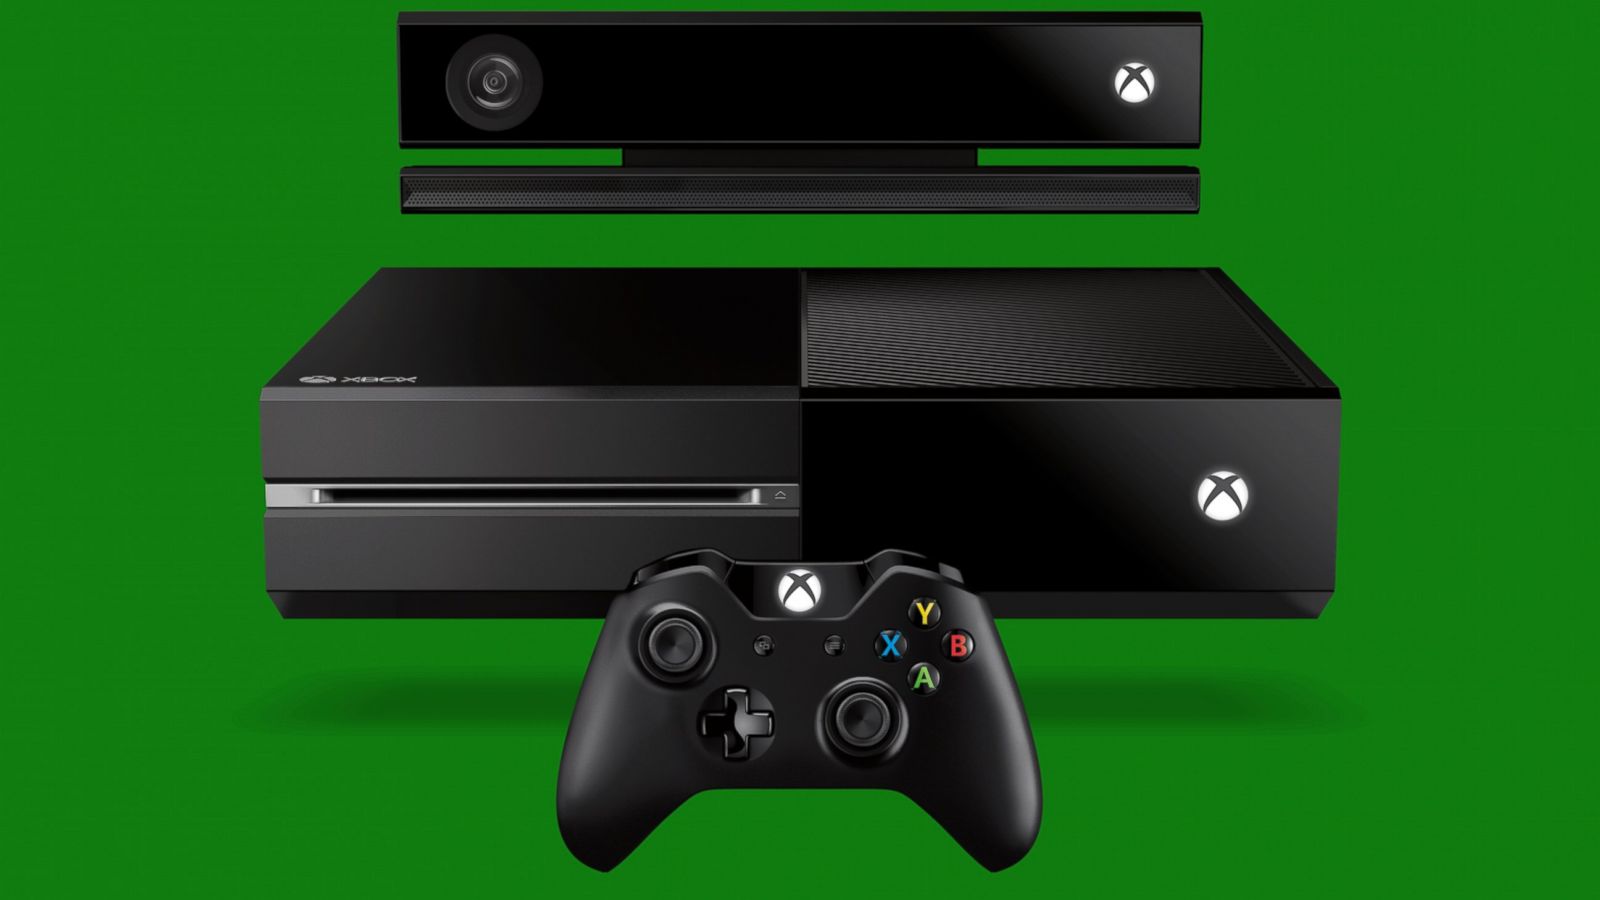 HT Xbox One console nt 131119 16x9 1600